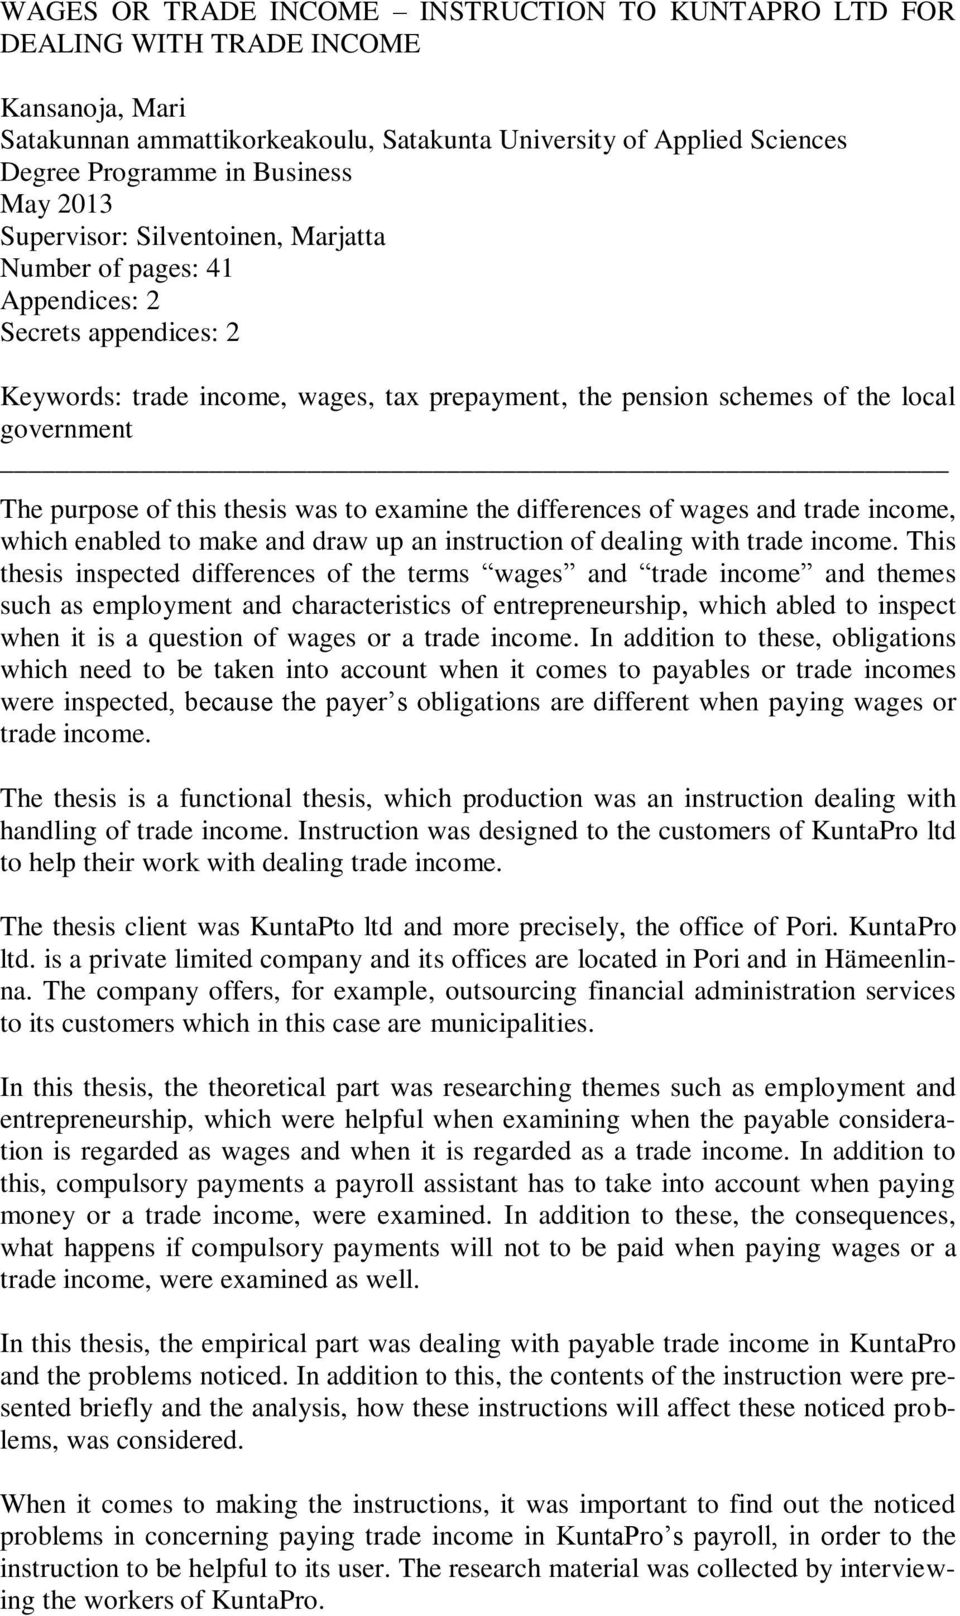 purpose of this thesis was to examine the differences of wages and trade income, which enabled to make and draw up an instruction of dealing with trade income.